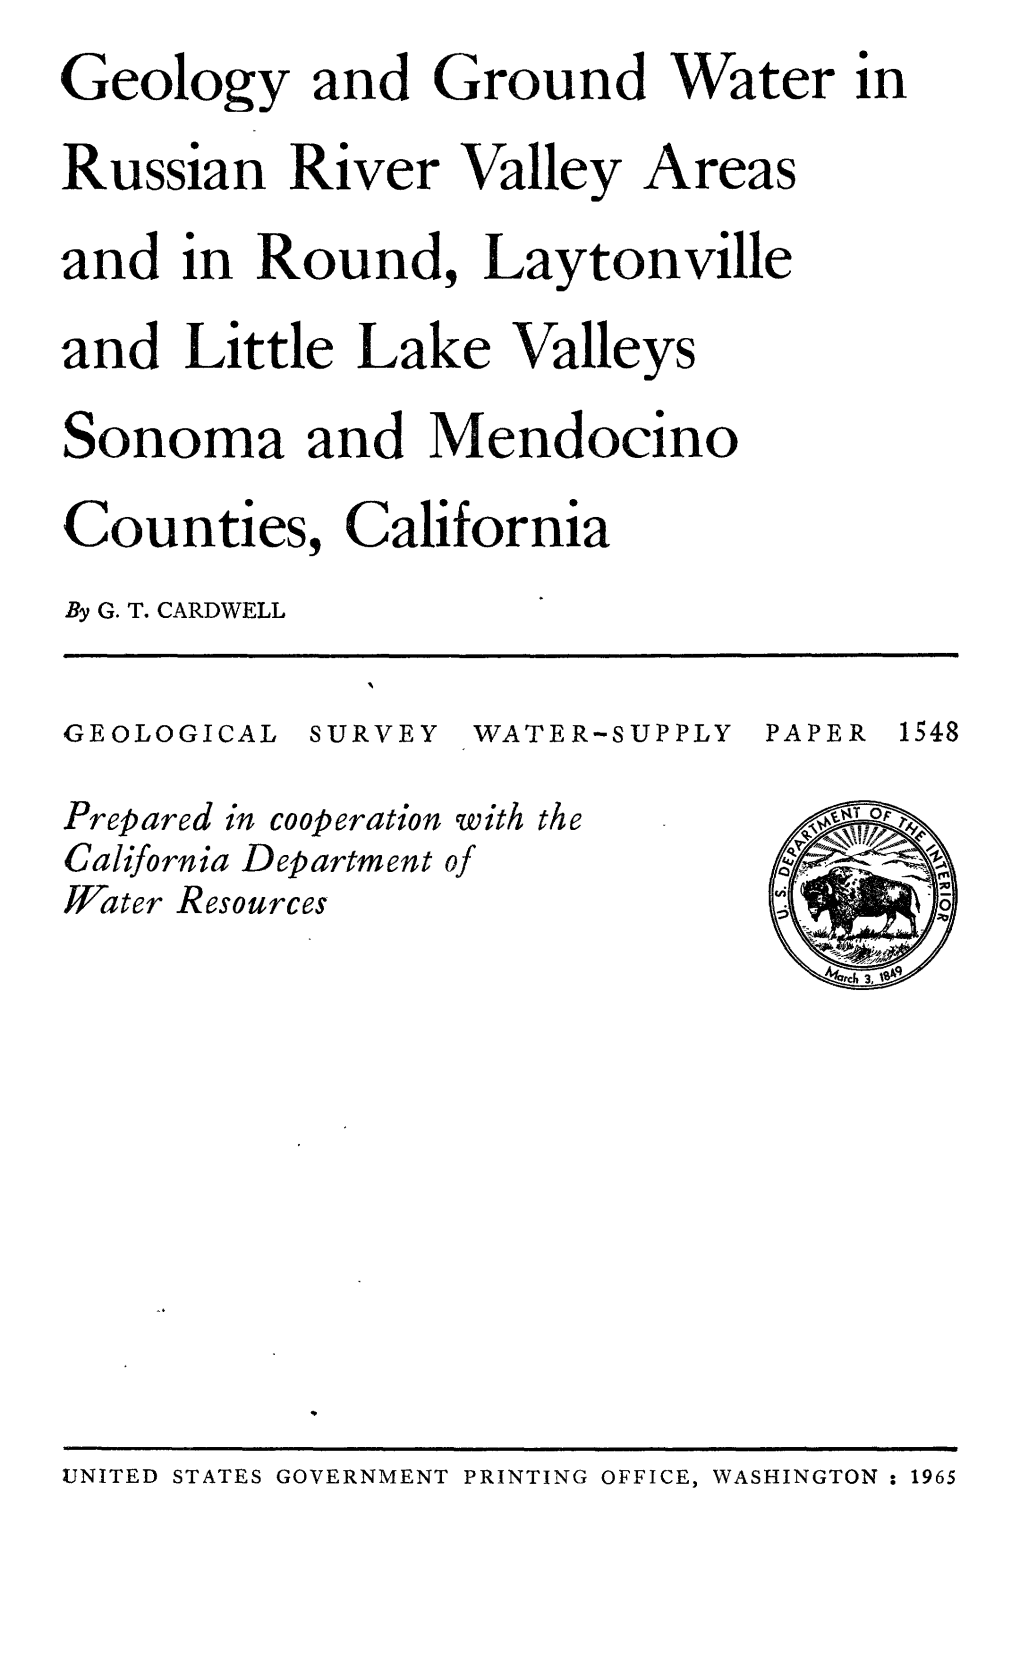 Geology and Ground Water in Russian River Valley Areas and in Round, Laytonville and Little Lake Valleys Sonoma and Mendocino Counties, California